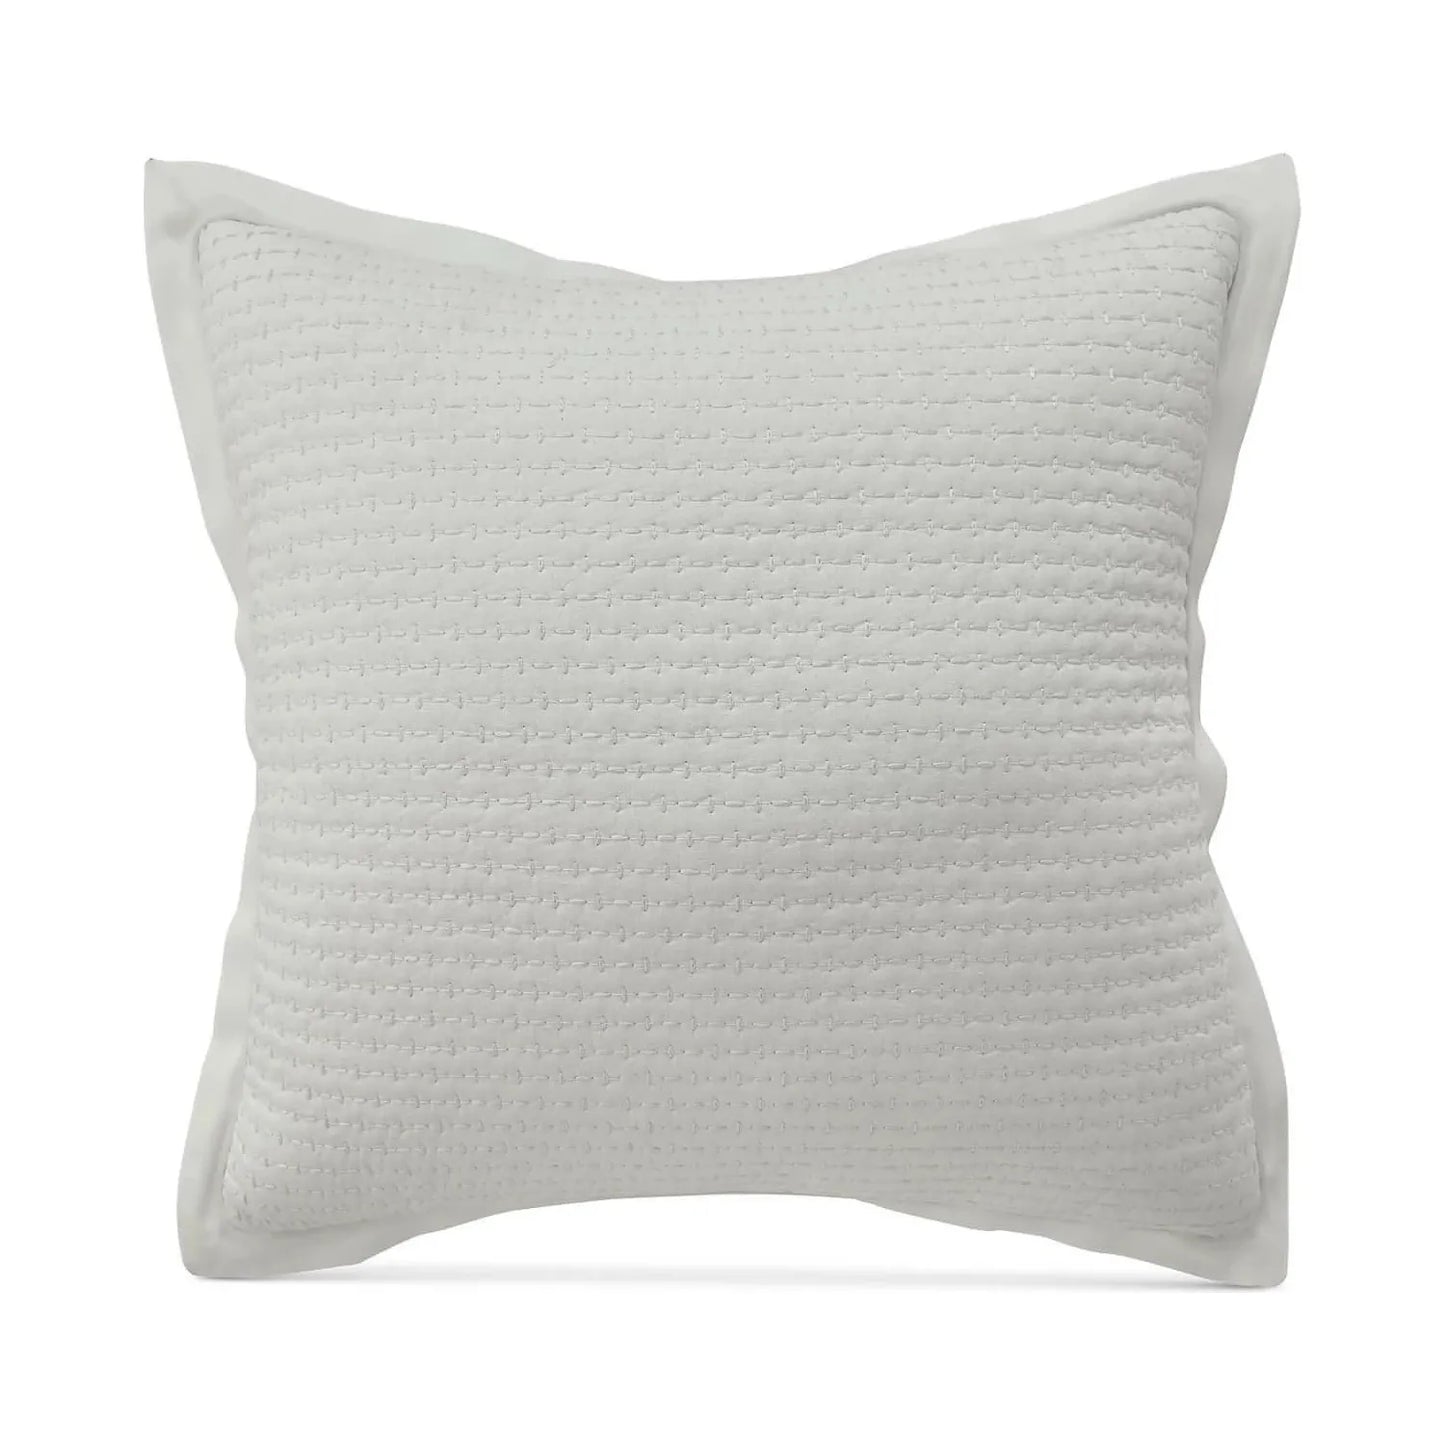 Croscill Nellie Quilted 16" Square Decorative Pillow (White) - Brandat Outlet